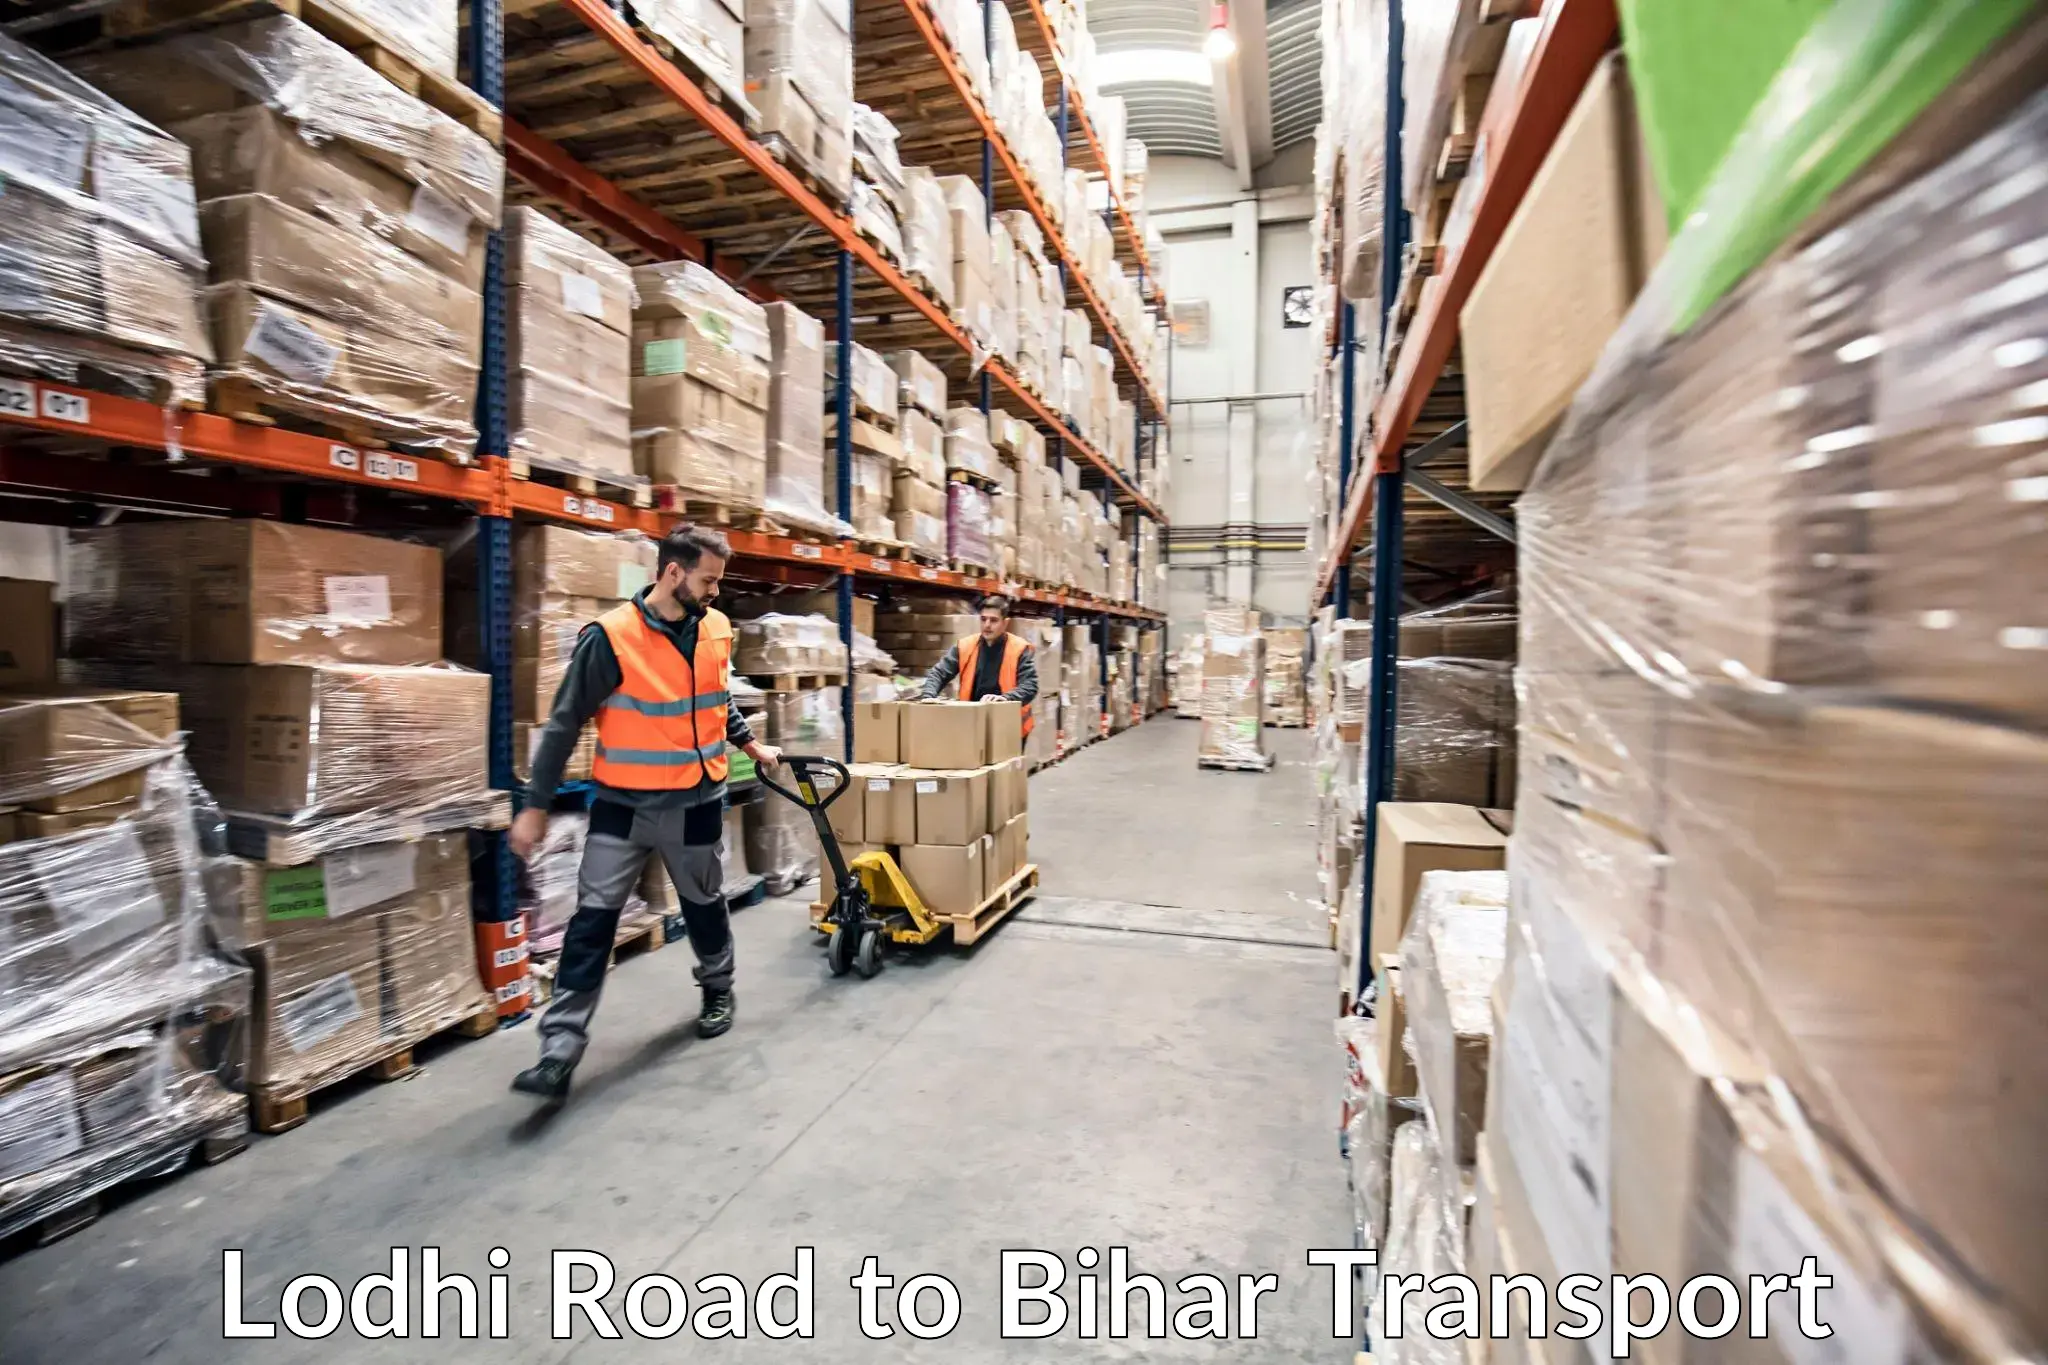 Container transport service Lodhi Road to Arrah